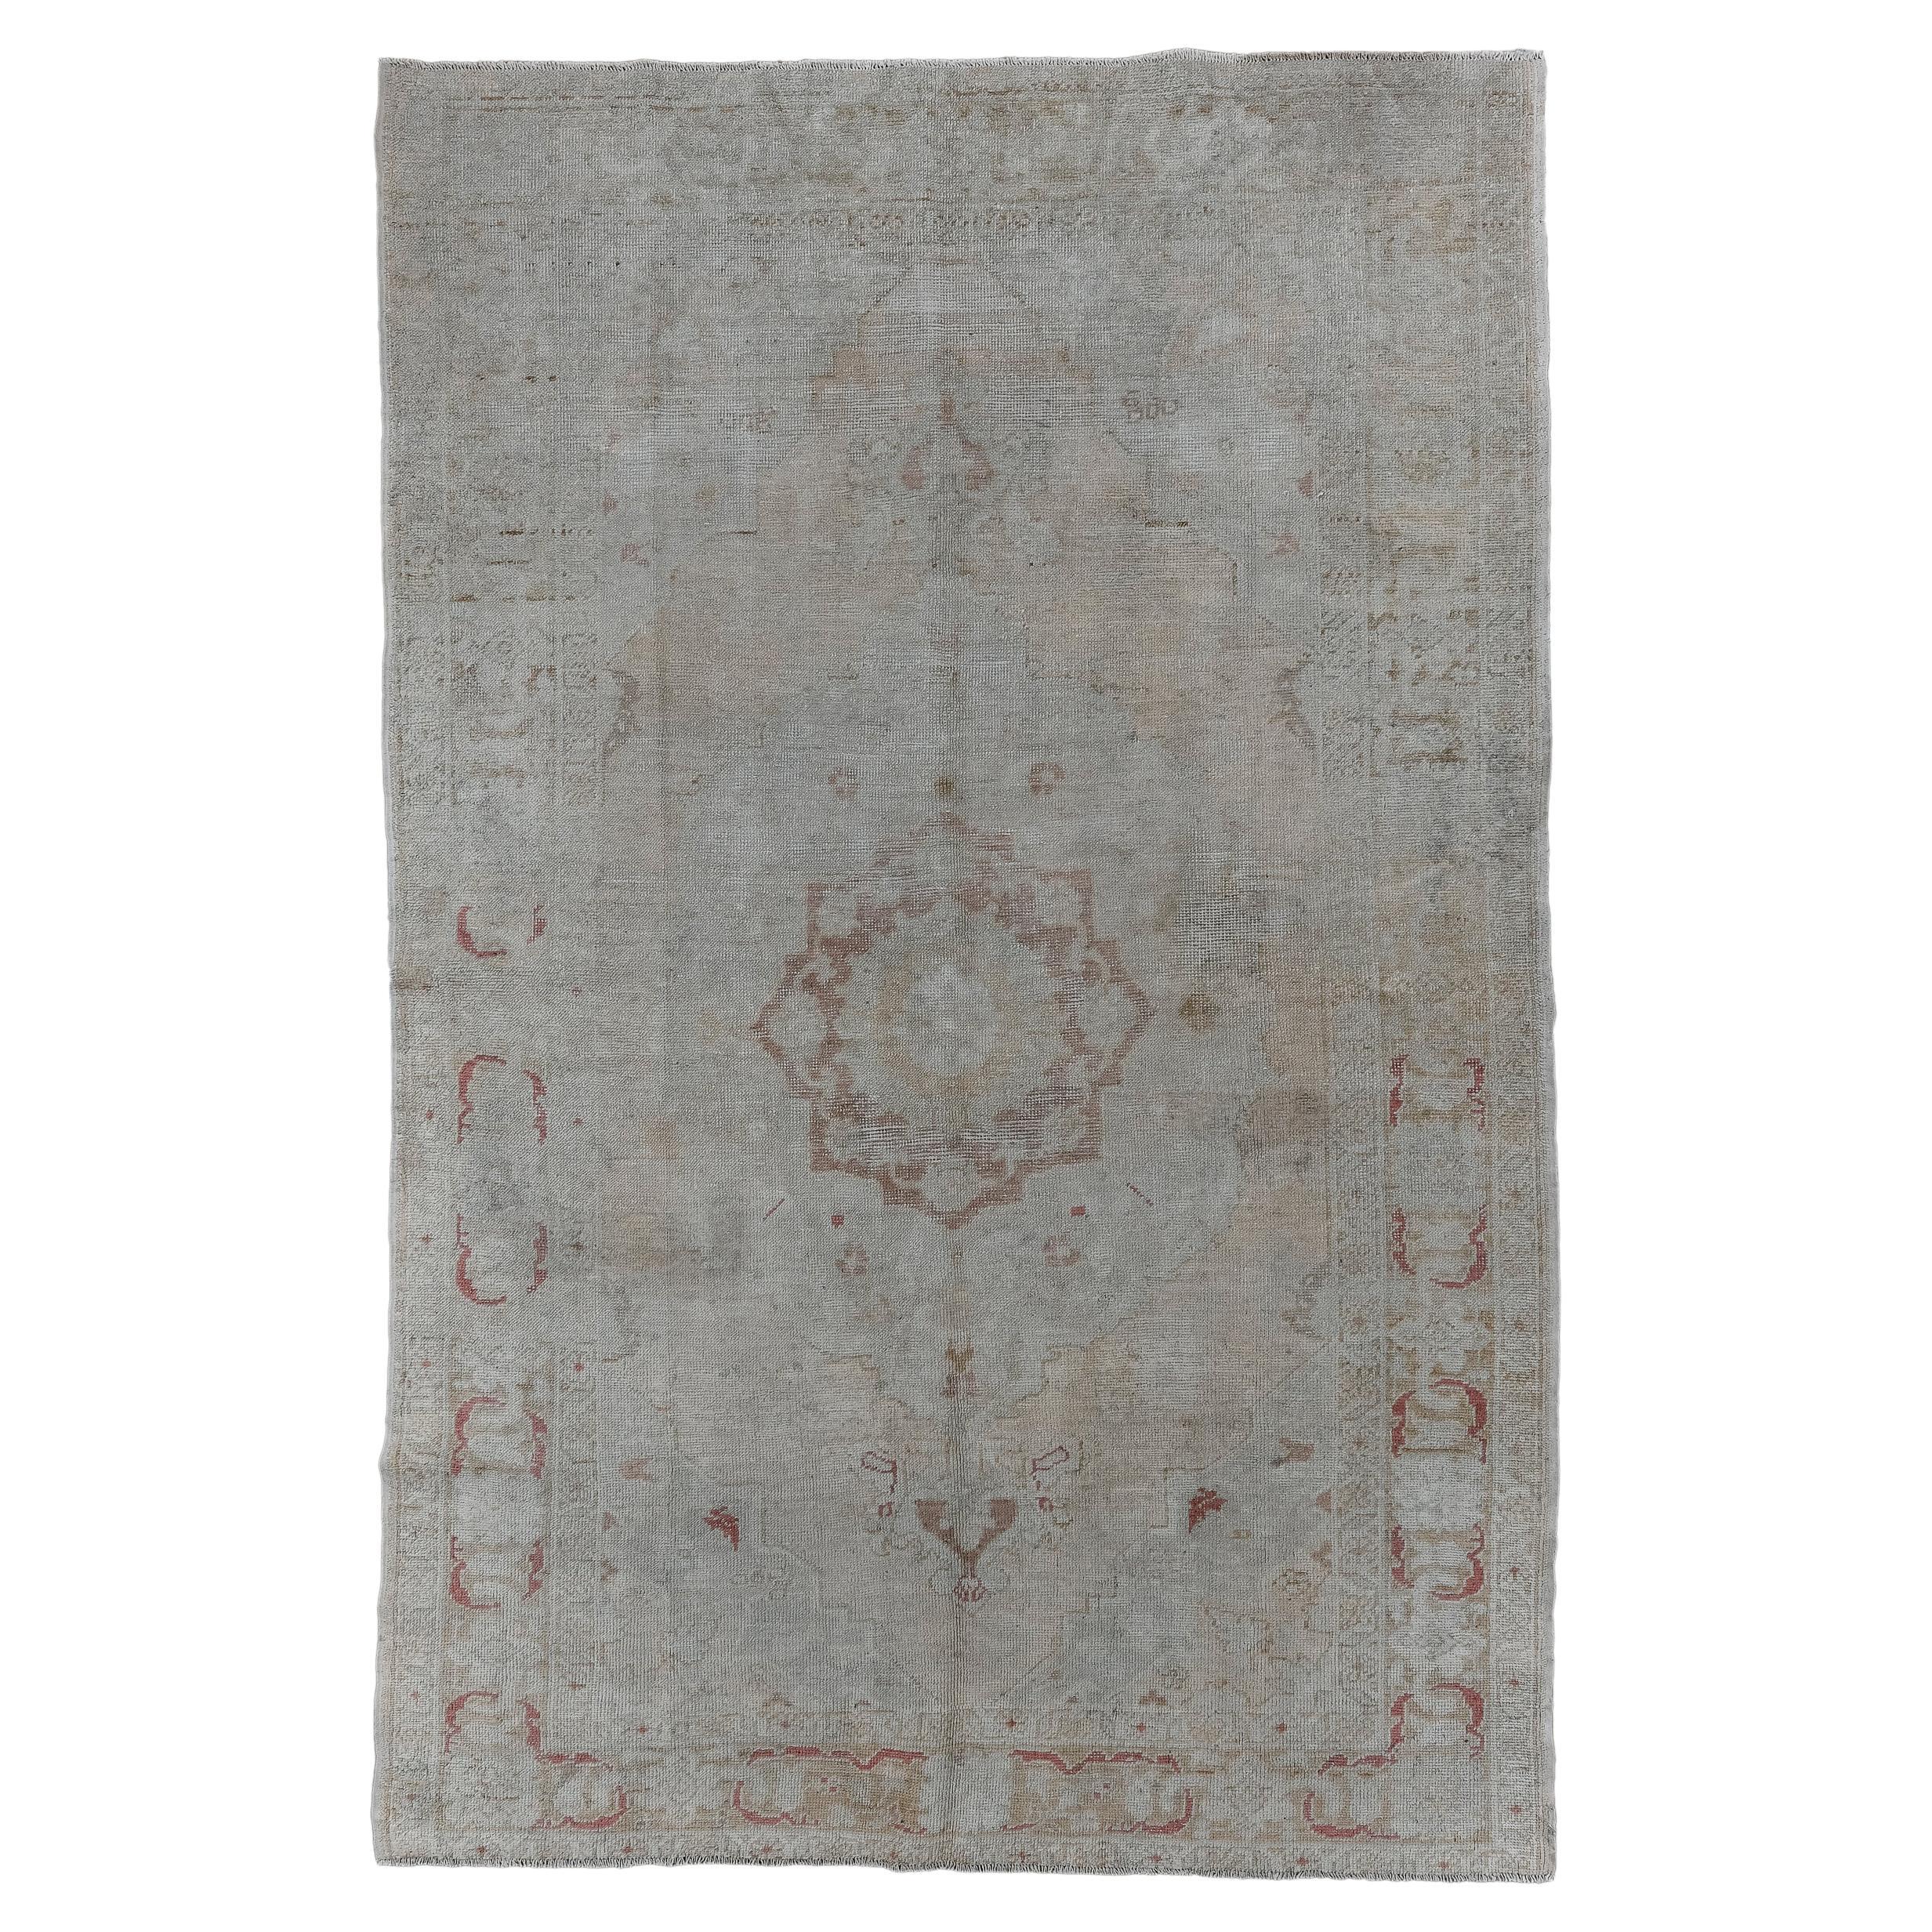 Soft Toned Turkish Oushak with Flower Designs